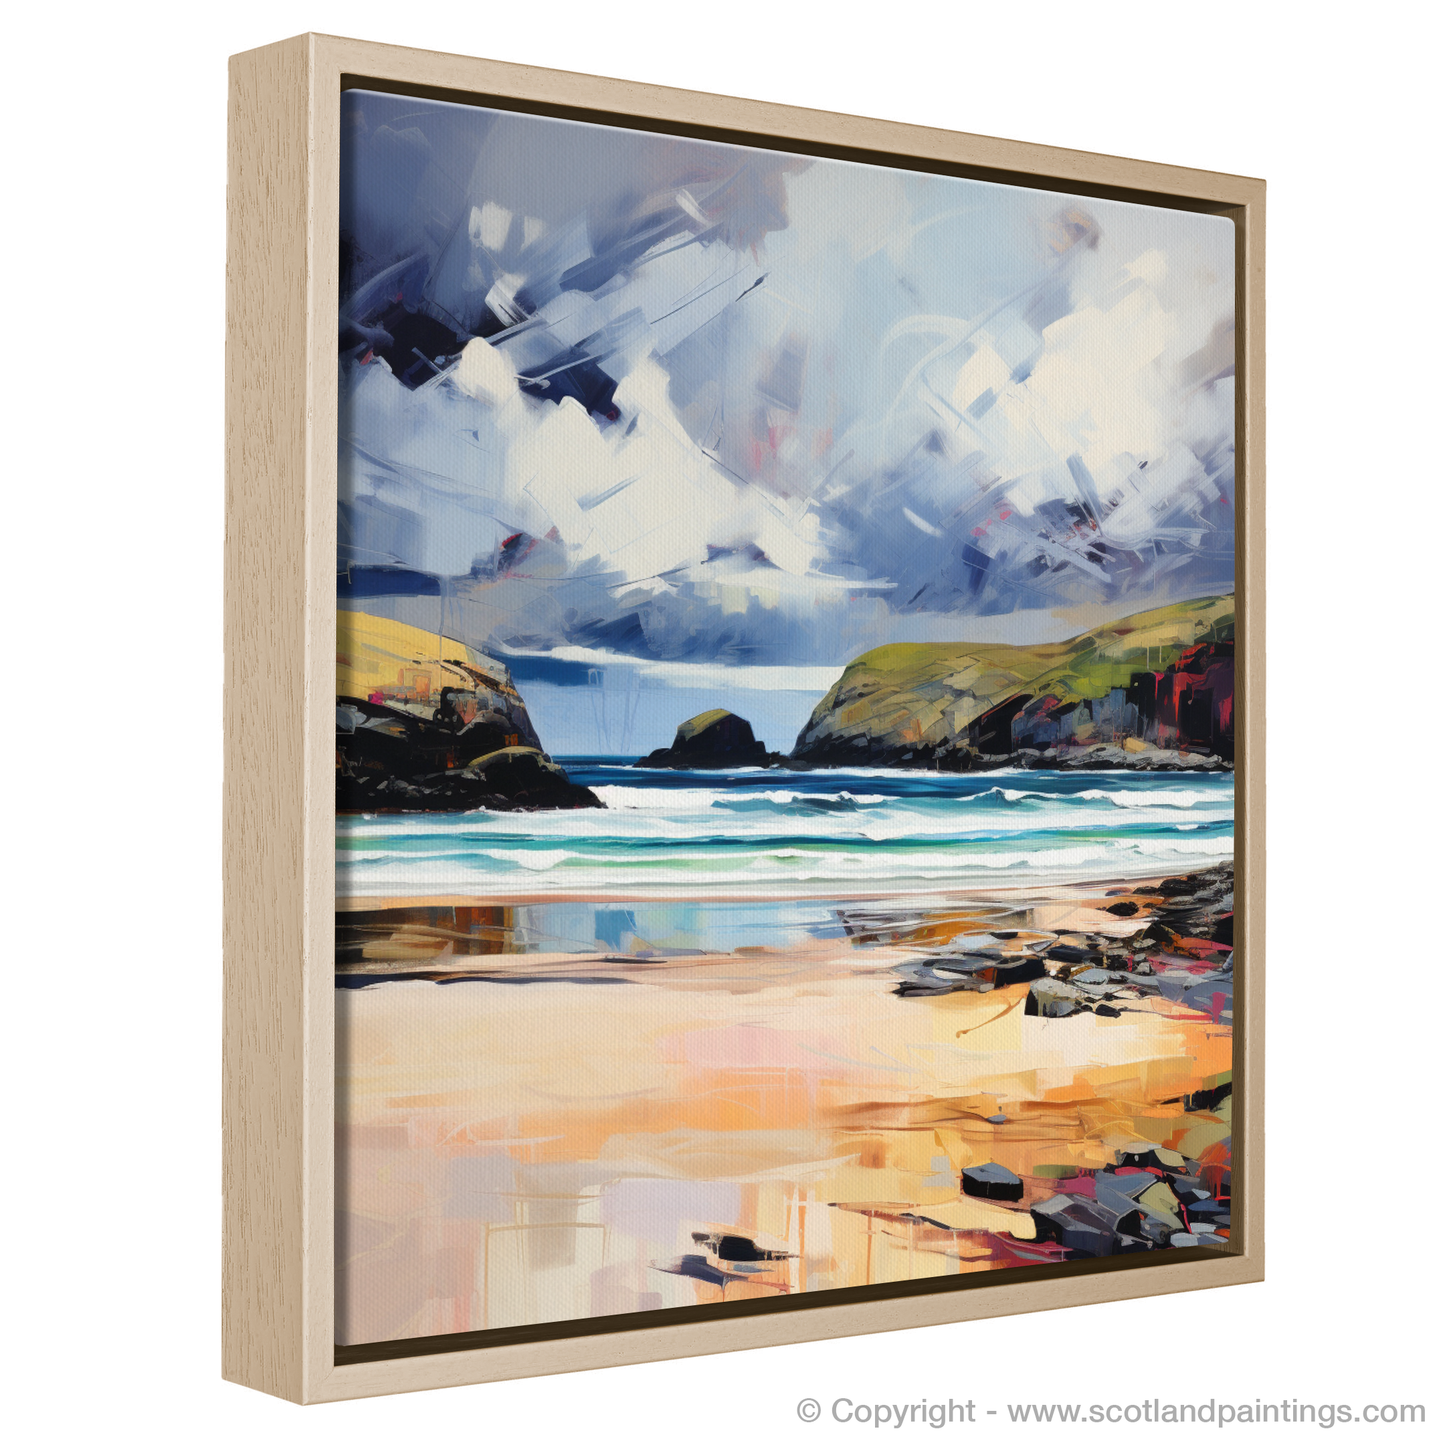 Painting and Art Print of Sandwood Bay with a stormy sky entitled "Storm's Embrace at Sandwood Bay".